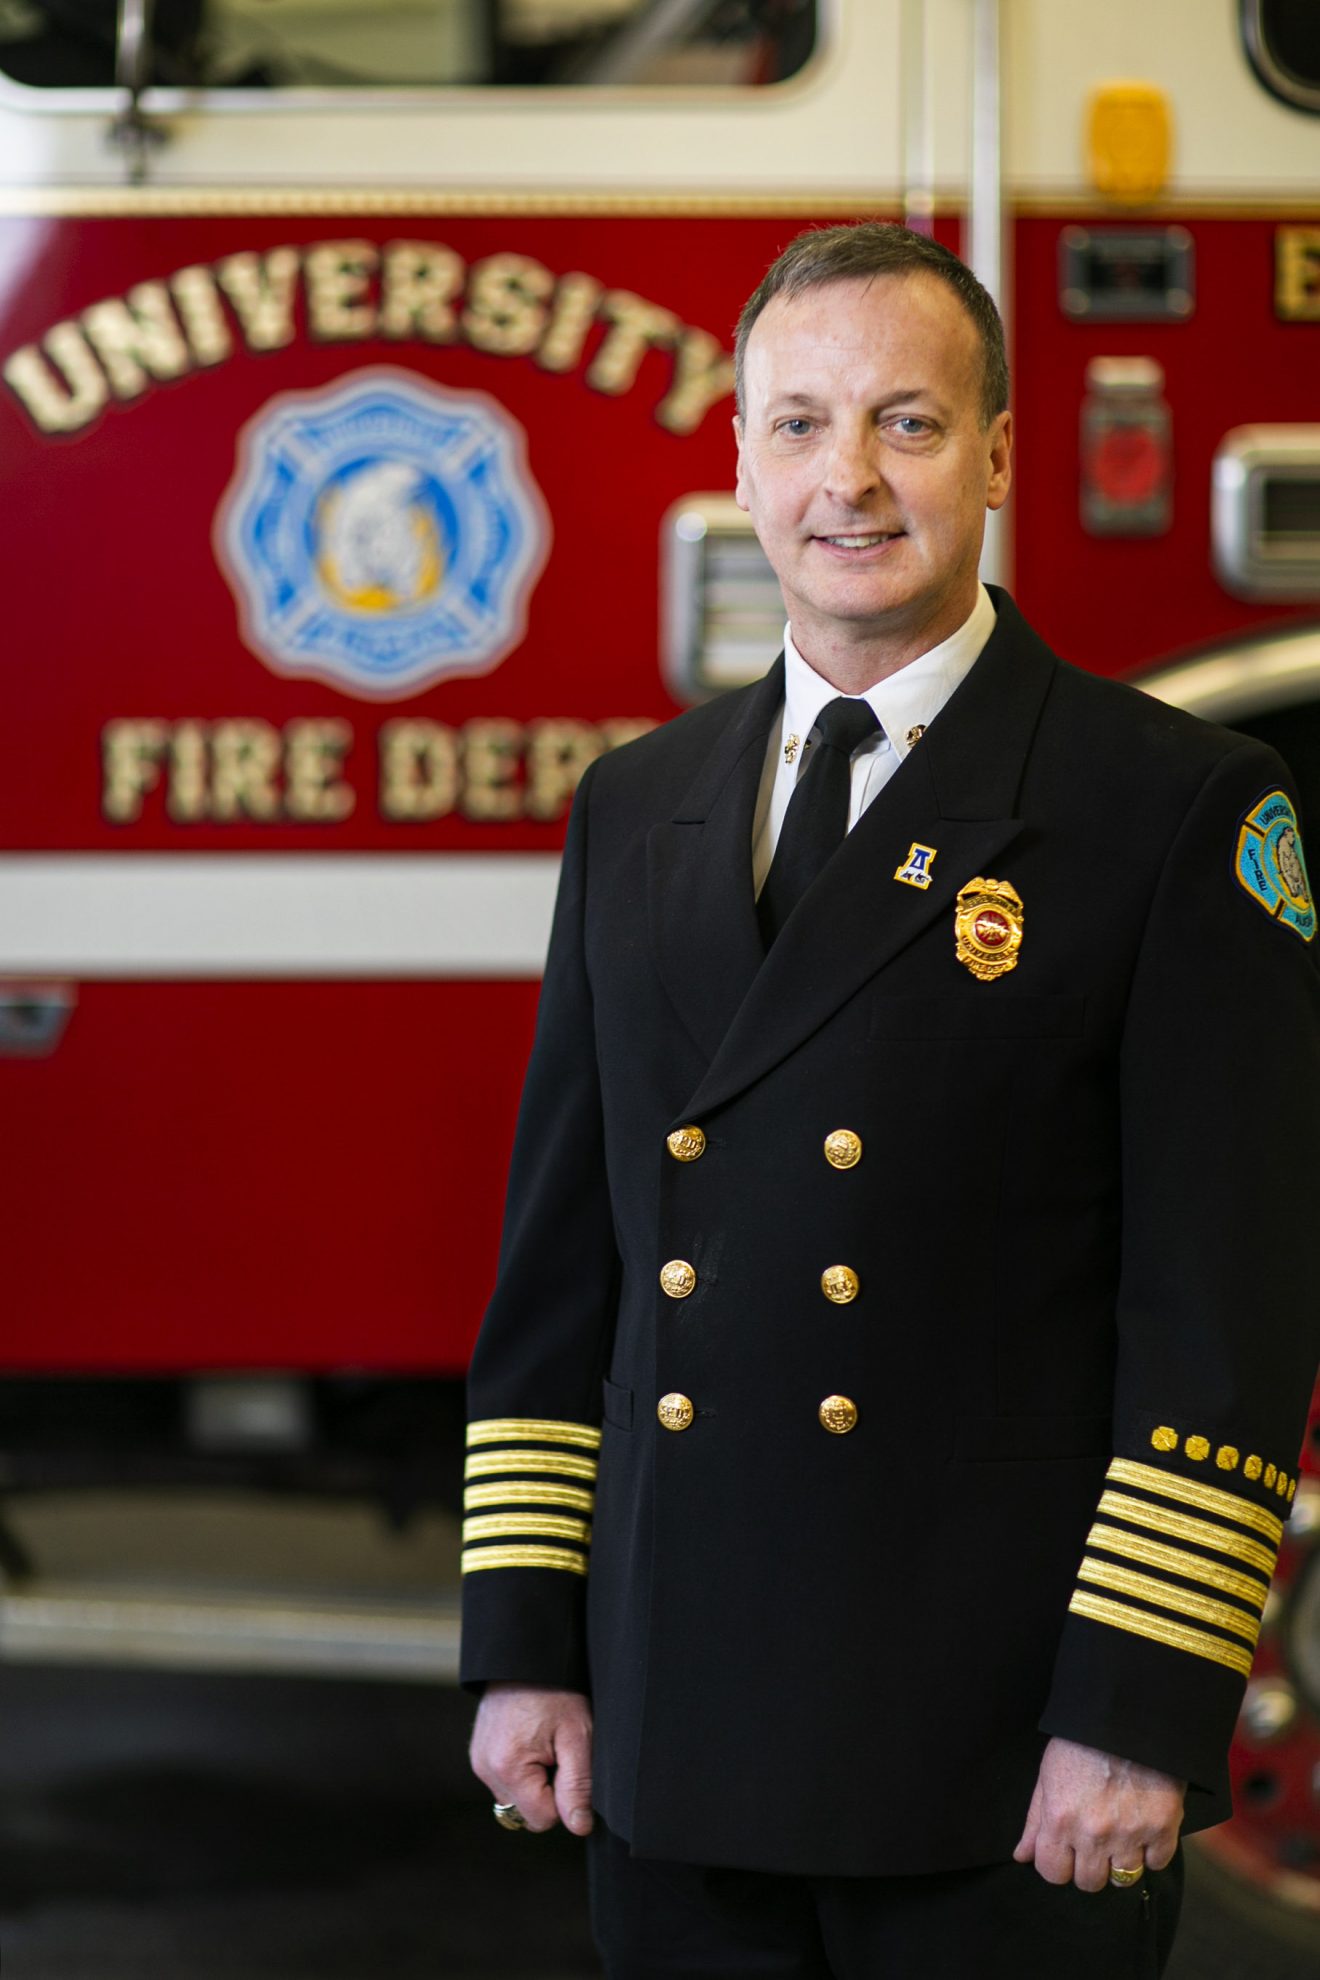 A man in dress uniform stands in front of a fire truck.